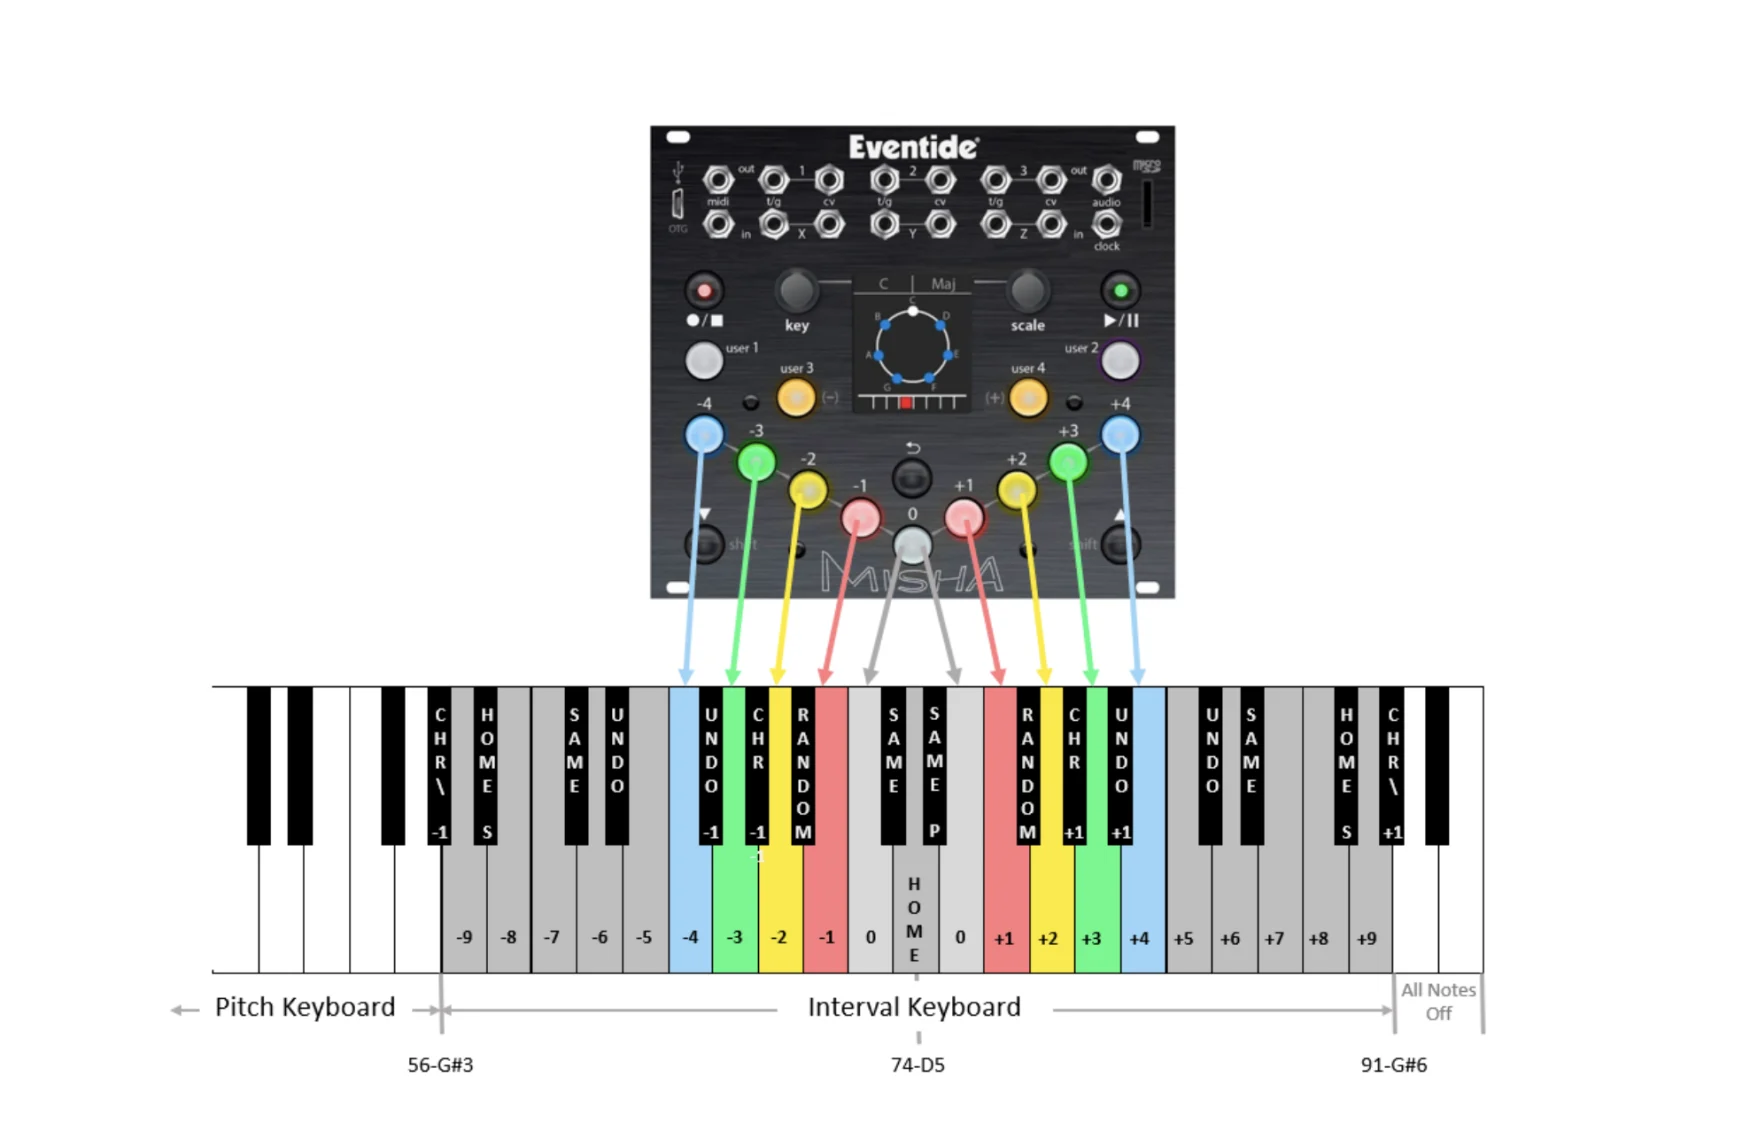 Draw exhibiting the default MIDI mapping for the Eventide Misha